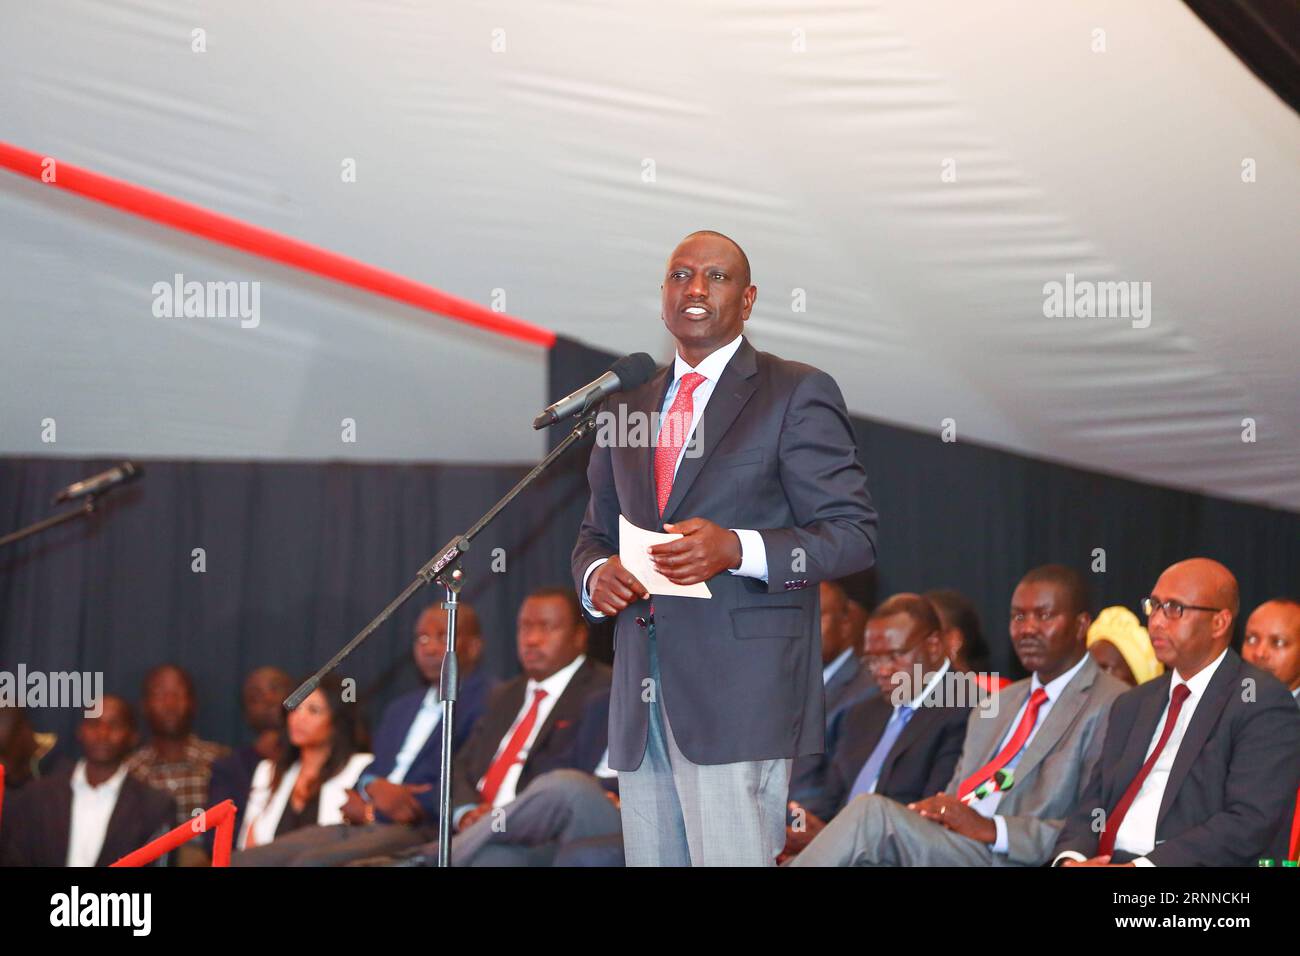 (170707) -- ELDORET(KENYA), July 7, 2017 -- Kenyan Deputy President William Ruto delivers a speech on the launching ceremony of the Special Economic Zone project in Eldoret, Kenya, on July 7, 2017. Kenya on Friday launched a Special Economic Zone (SEZ) project that is expected to attract about 2 billion U.S. dollars of foreign investments. The project is a joint venture between Kenyan-based company Africa Economic Zone and China s Guangdong New South Group. ) KENYA-ELDORET-SPECIAL ECONOMIC ZONE-LAUNCHING CEREMONY PanxSiwei PUBLICATIONxNOTxINxCHN   Eldoret Kenya July 7 2017 Kenyan Deputy Presid Stock Photo